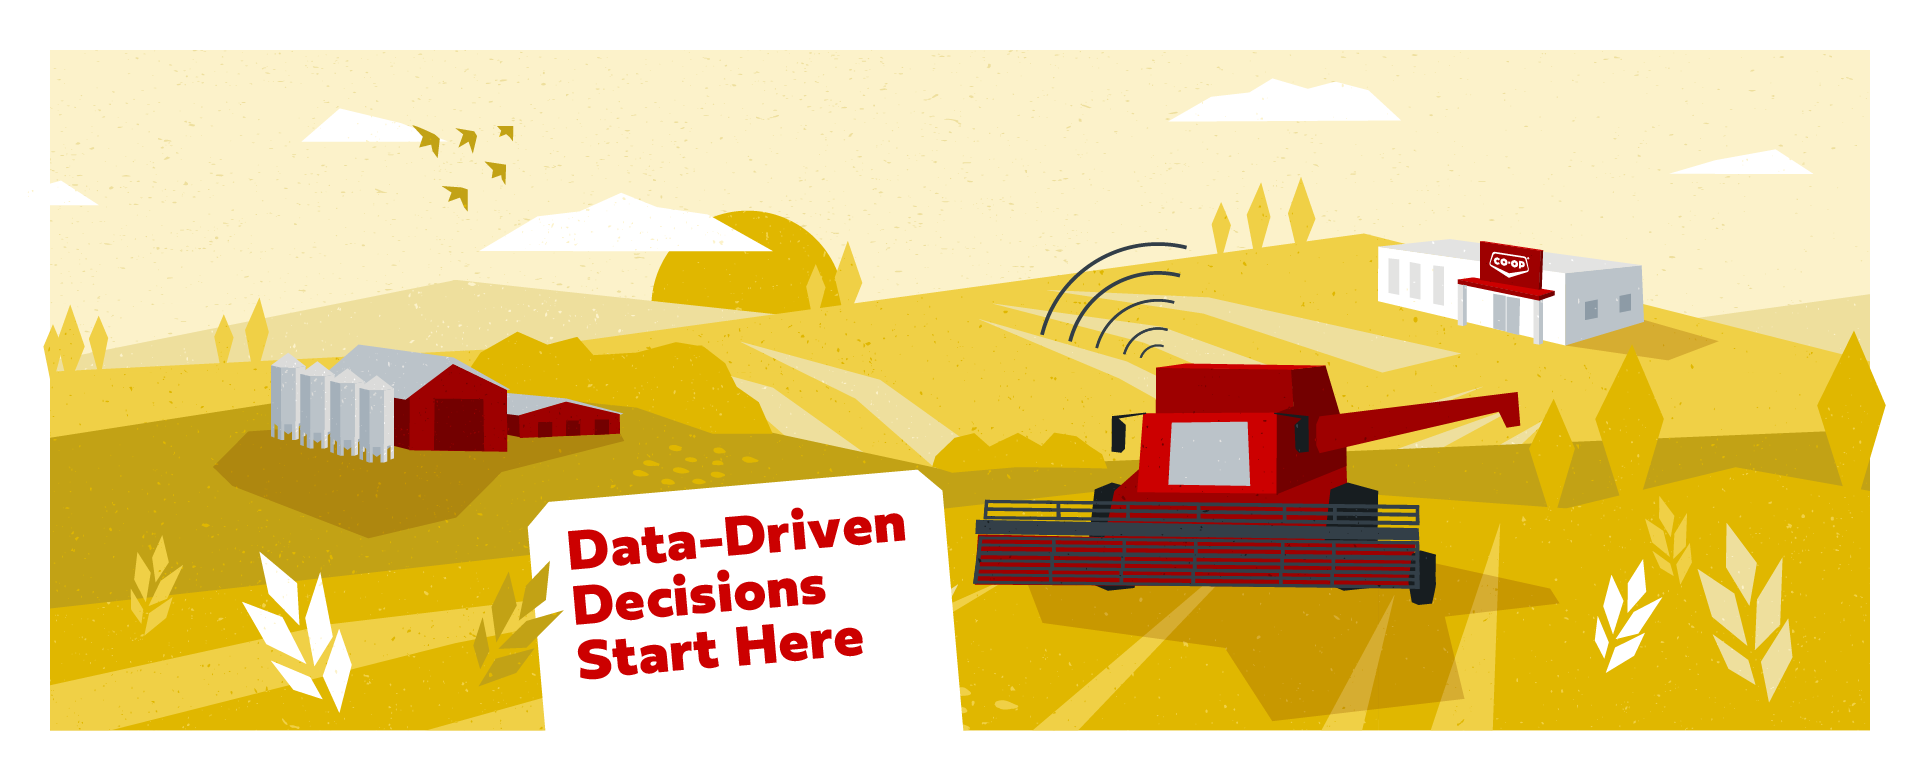 Data-driven decisions live here